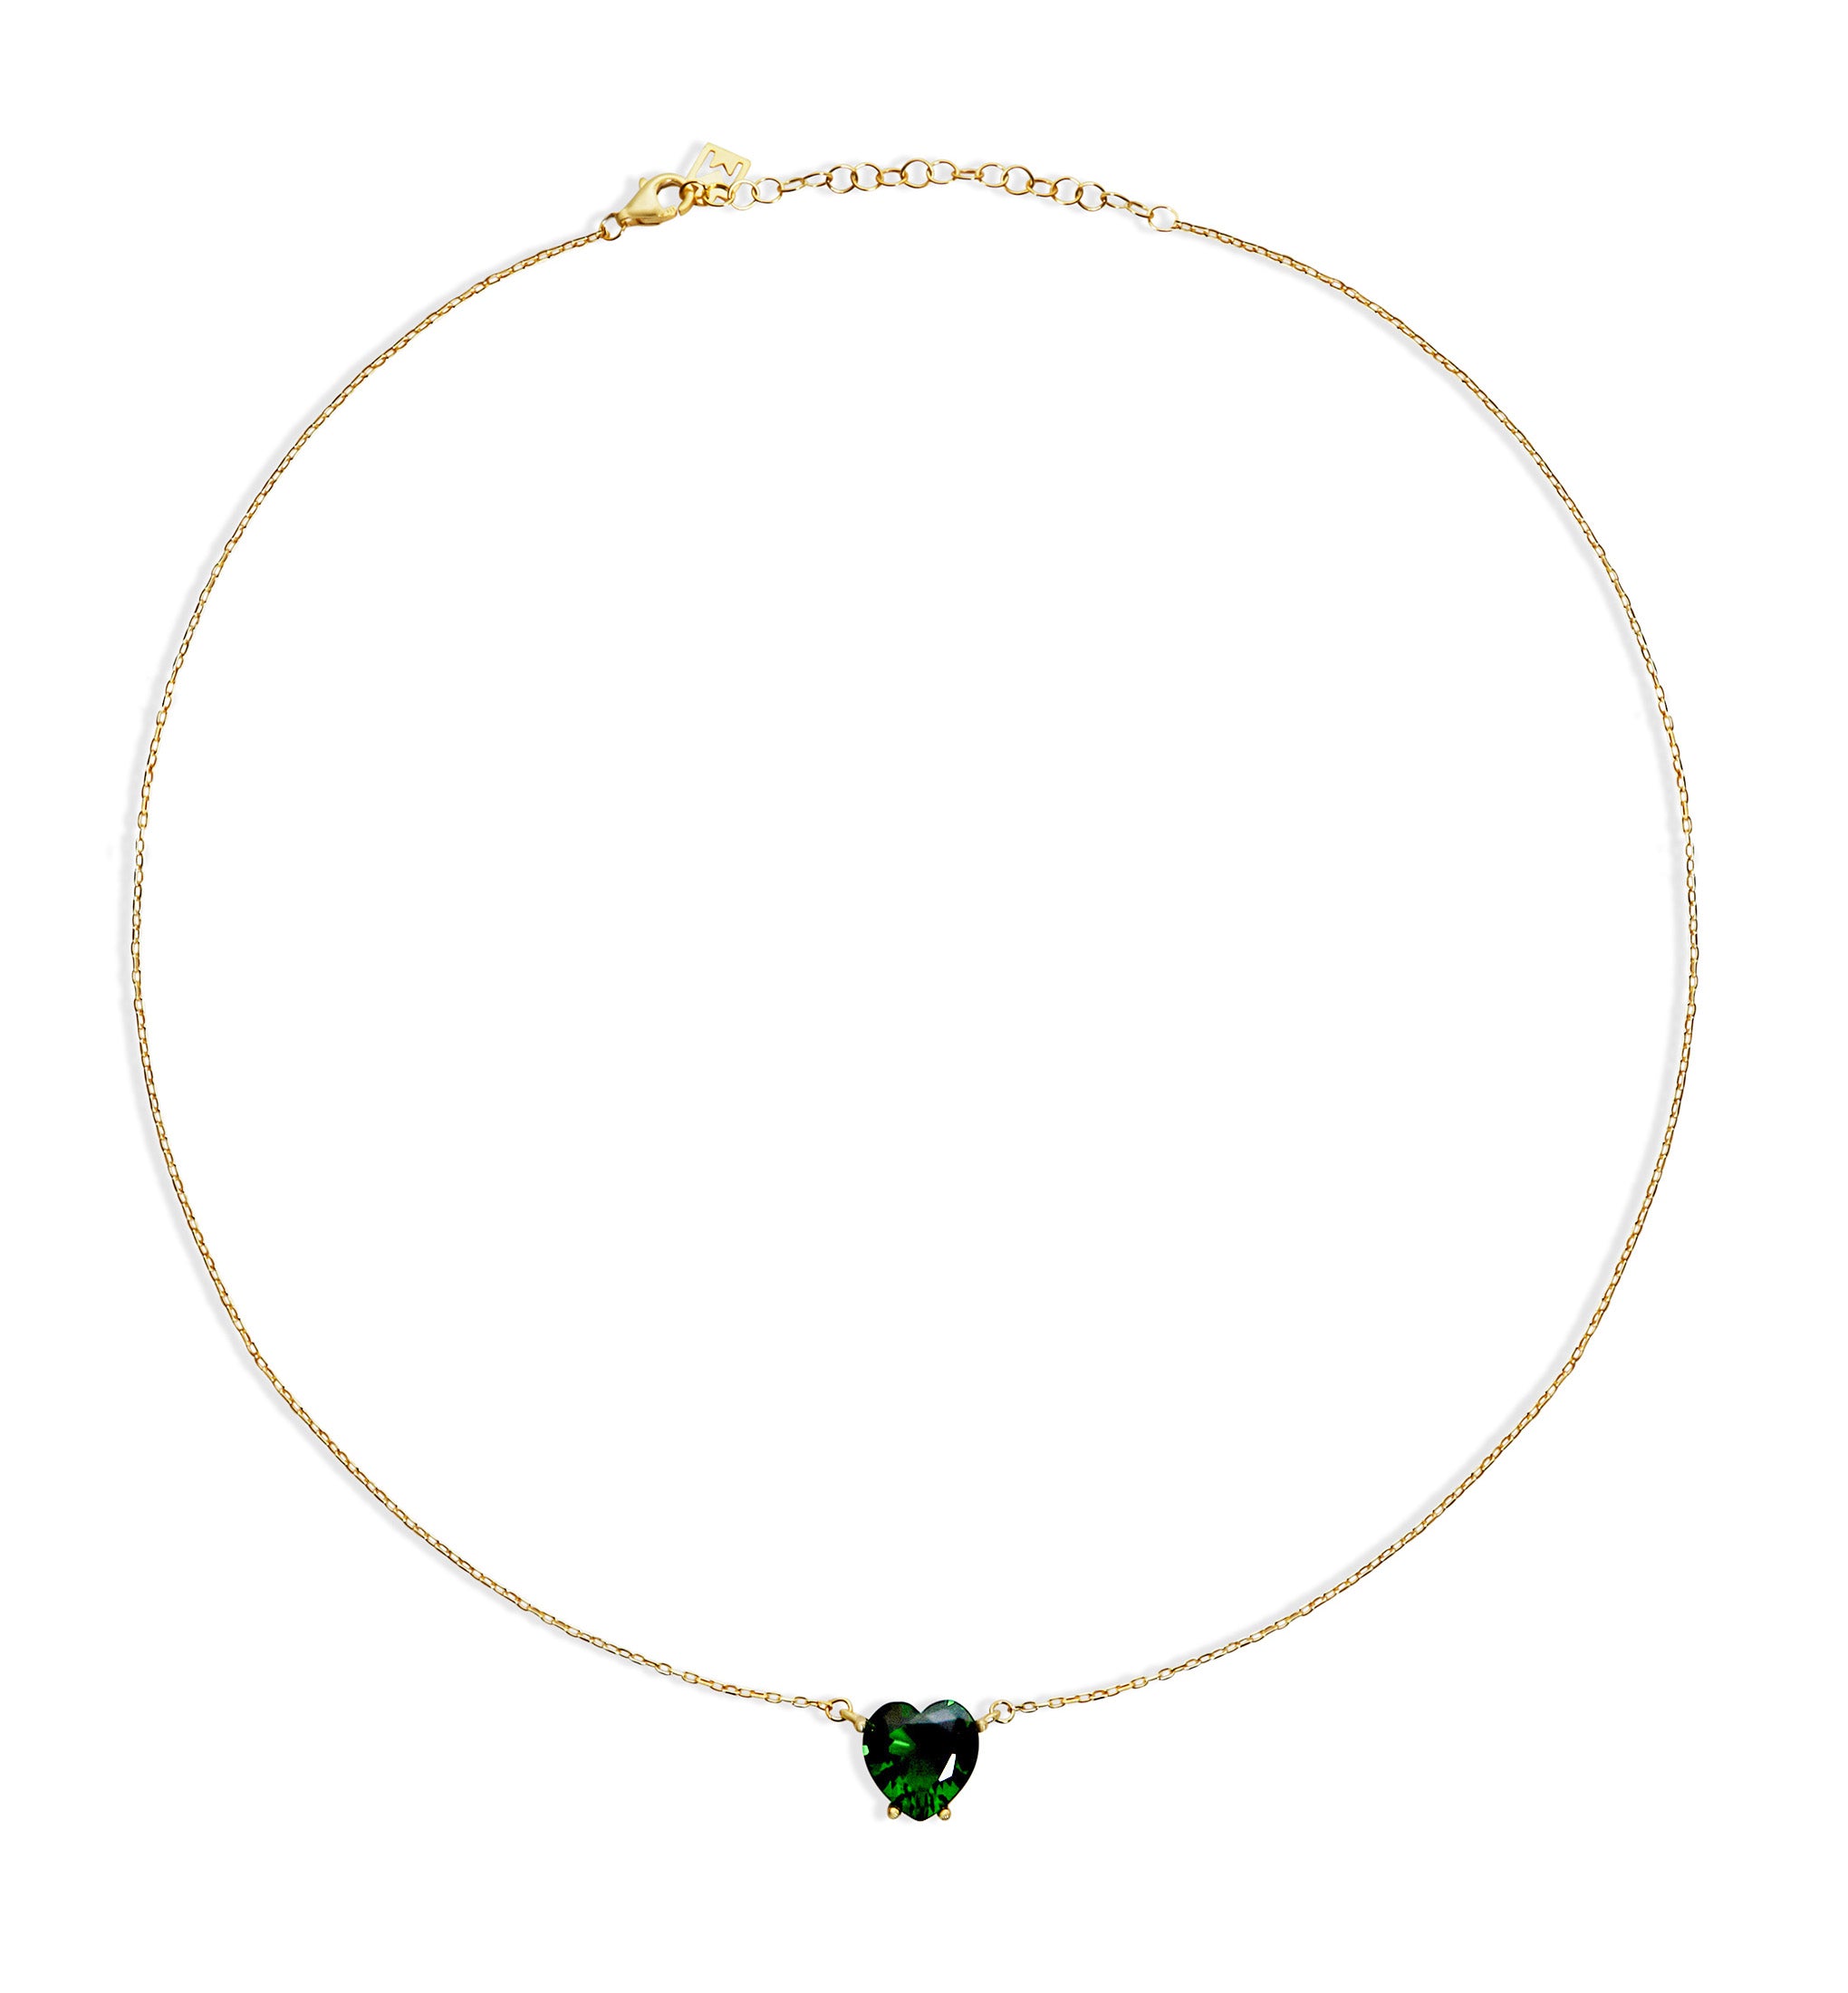 Emerald Lace Heart Necklace, Yellow Gold, 16.5